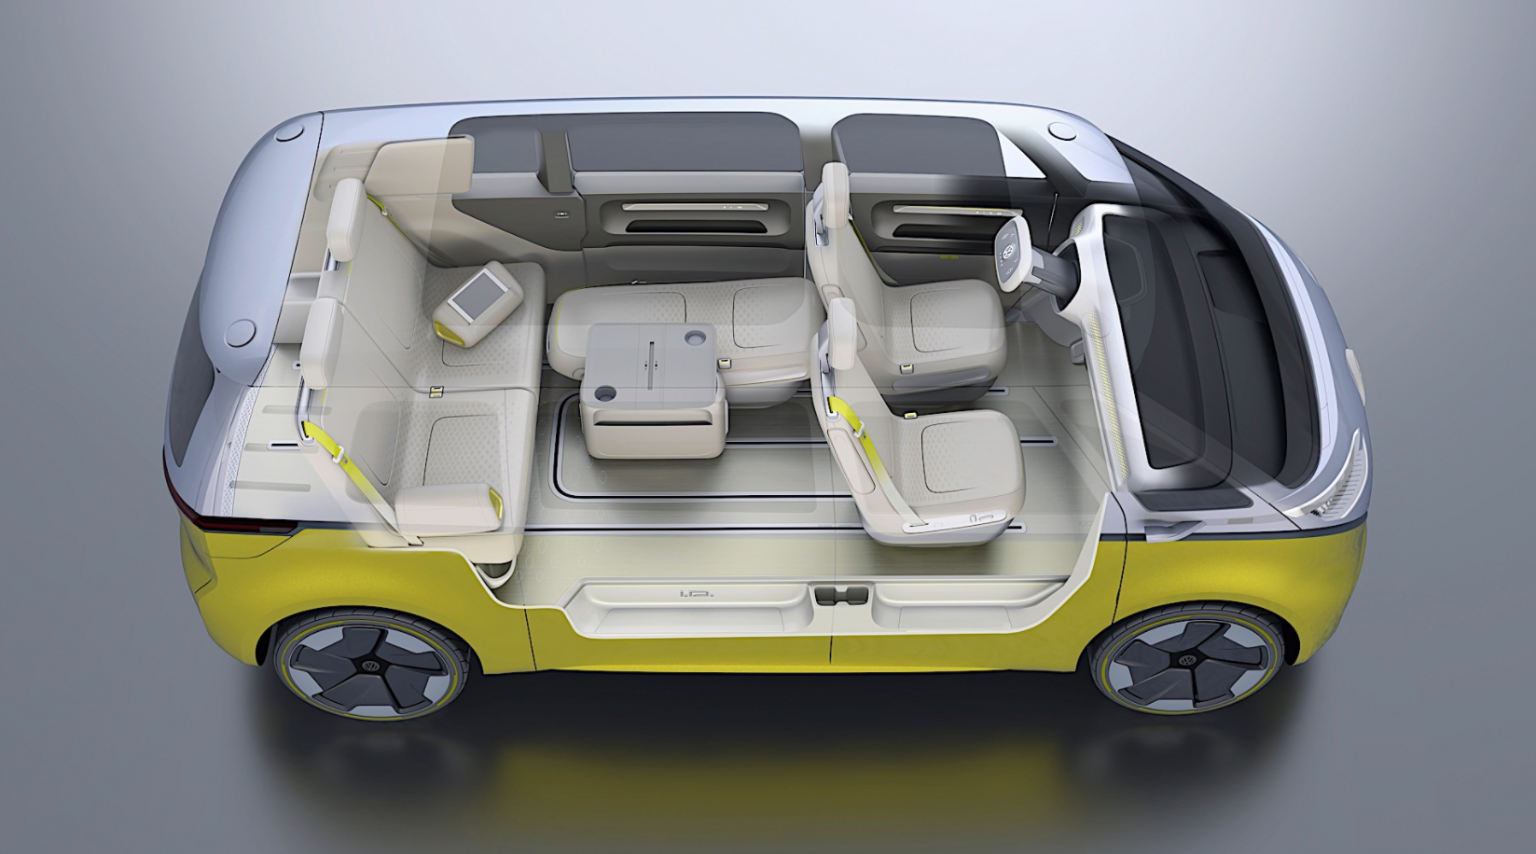 Retro Appeal of 2024 VW Bus and Its Advanced Technology